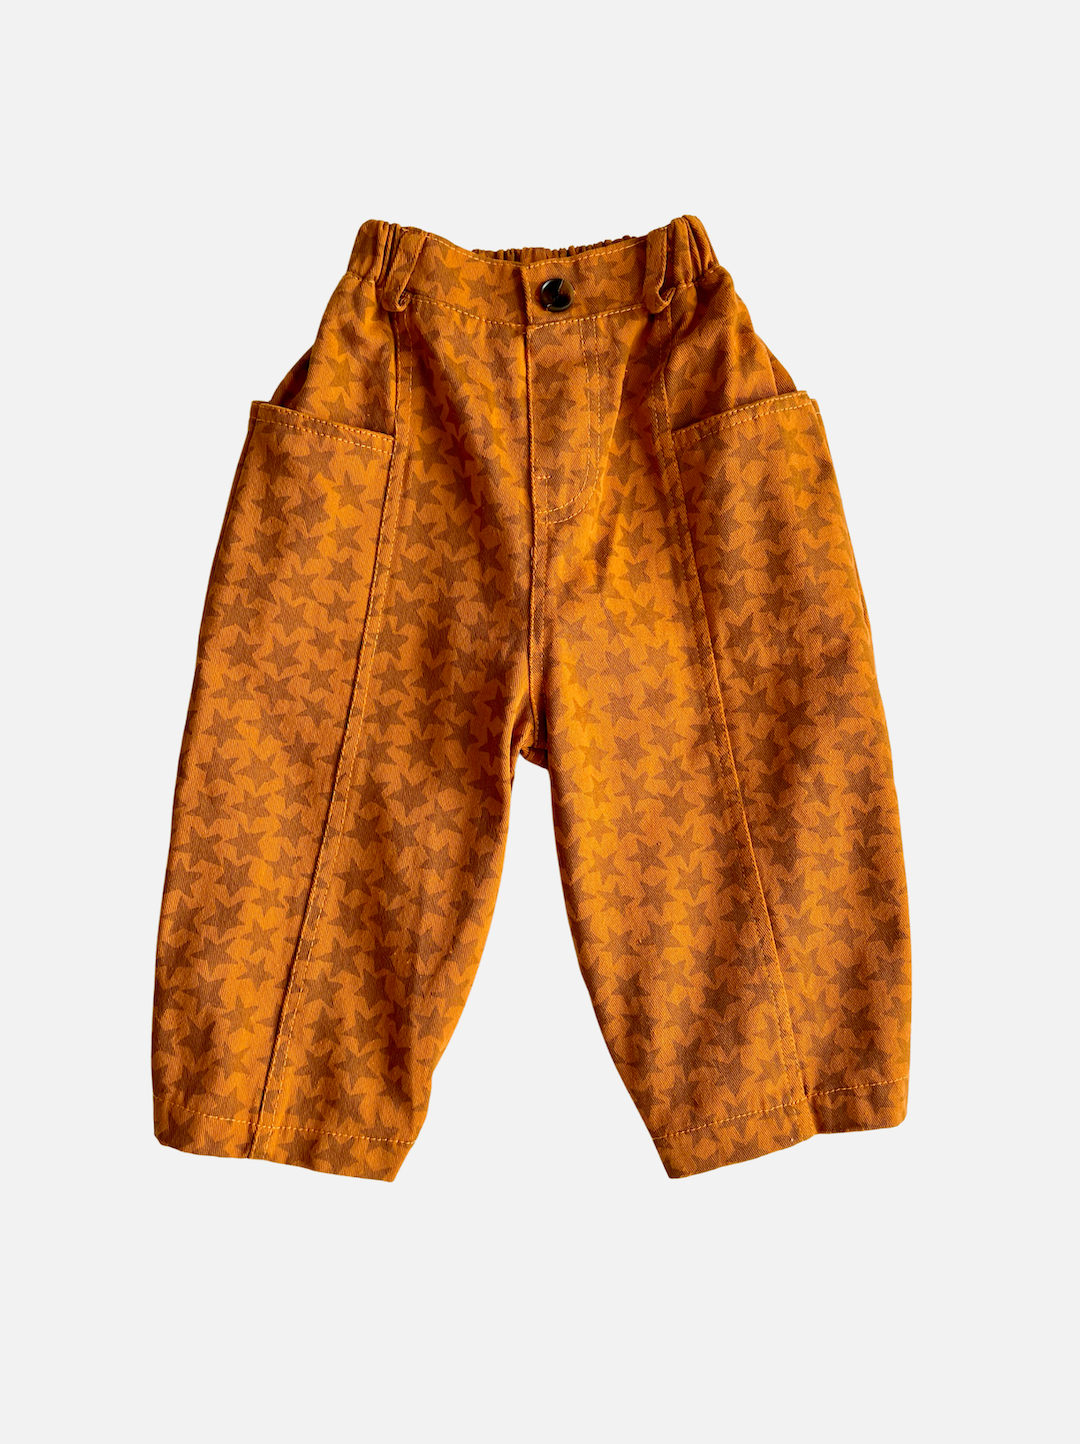 A pair of kids' pants in orange with a pattern of rust stars, with two long side pockets